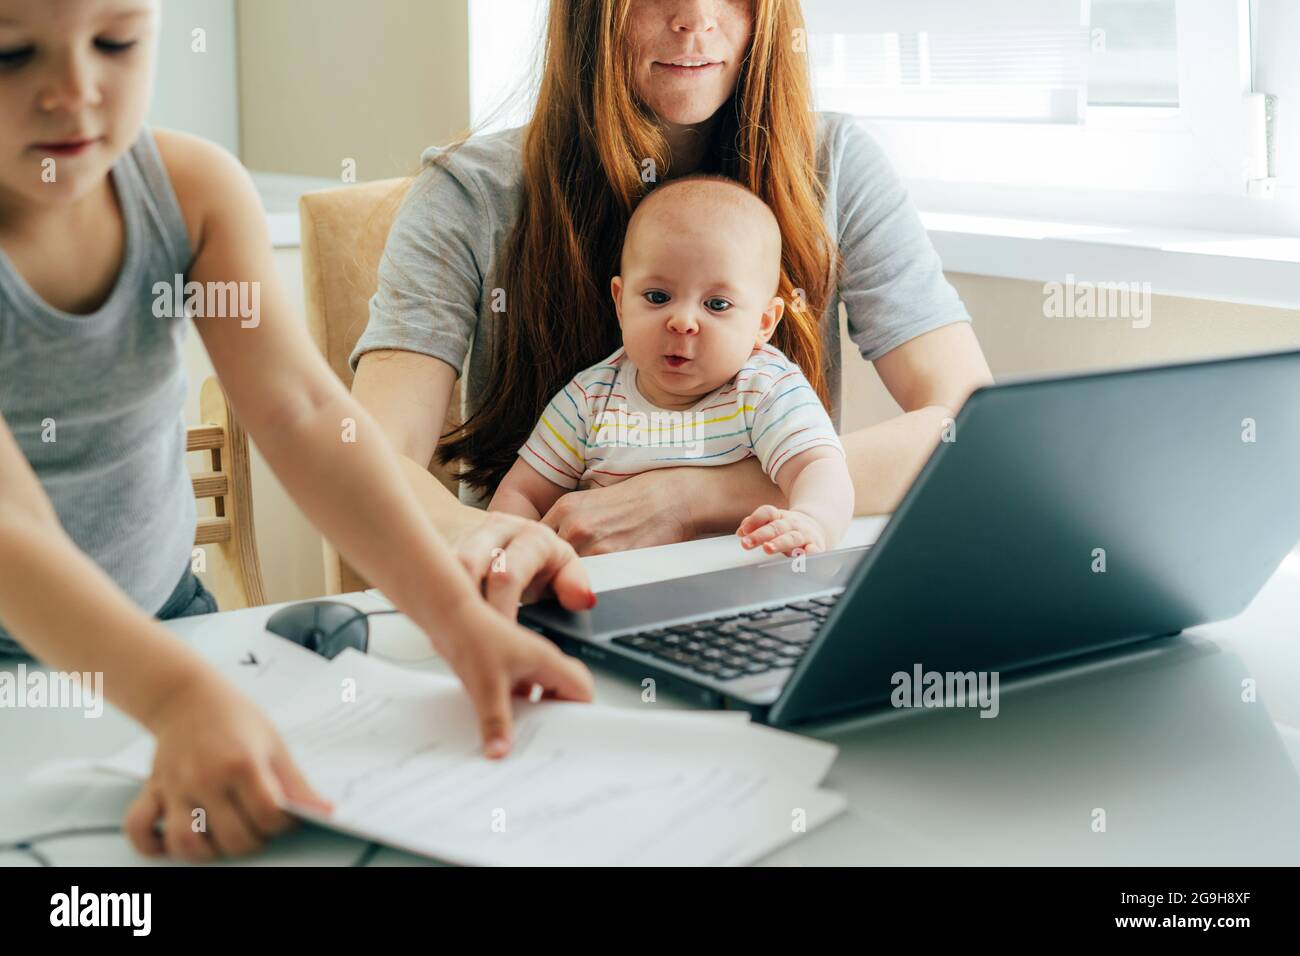 Young focused business mom with two children working remotely on a laptop at home office. Mom holds the baby on her lap. Stock Photo